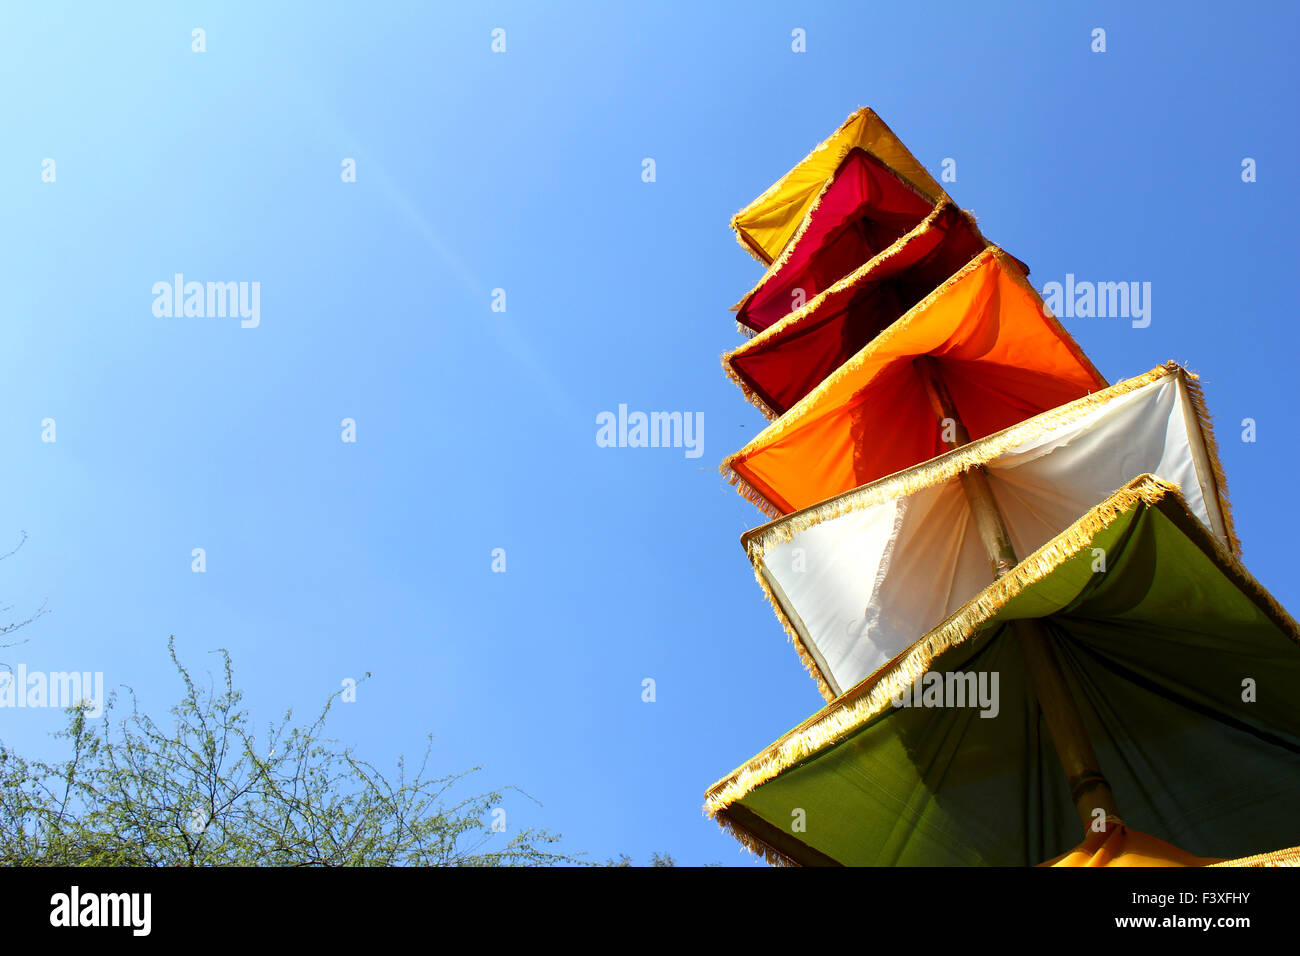 indian nationa tricolors cloths on stick Stock Photo